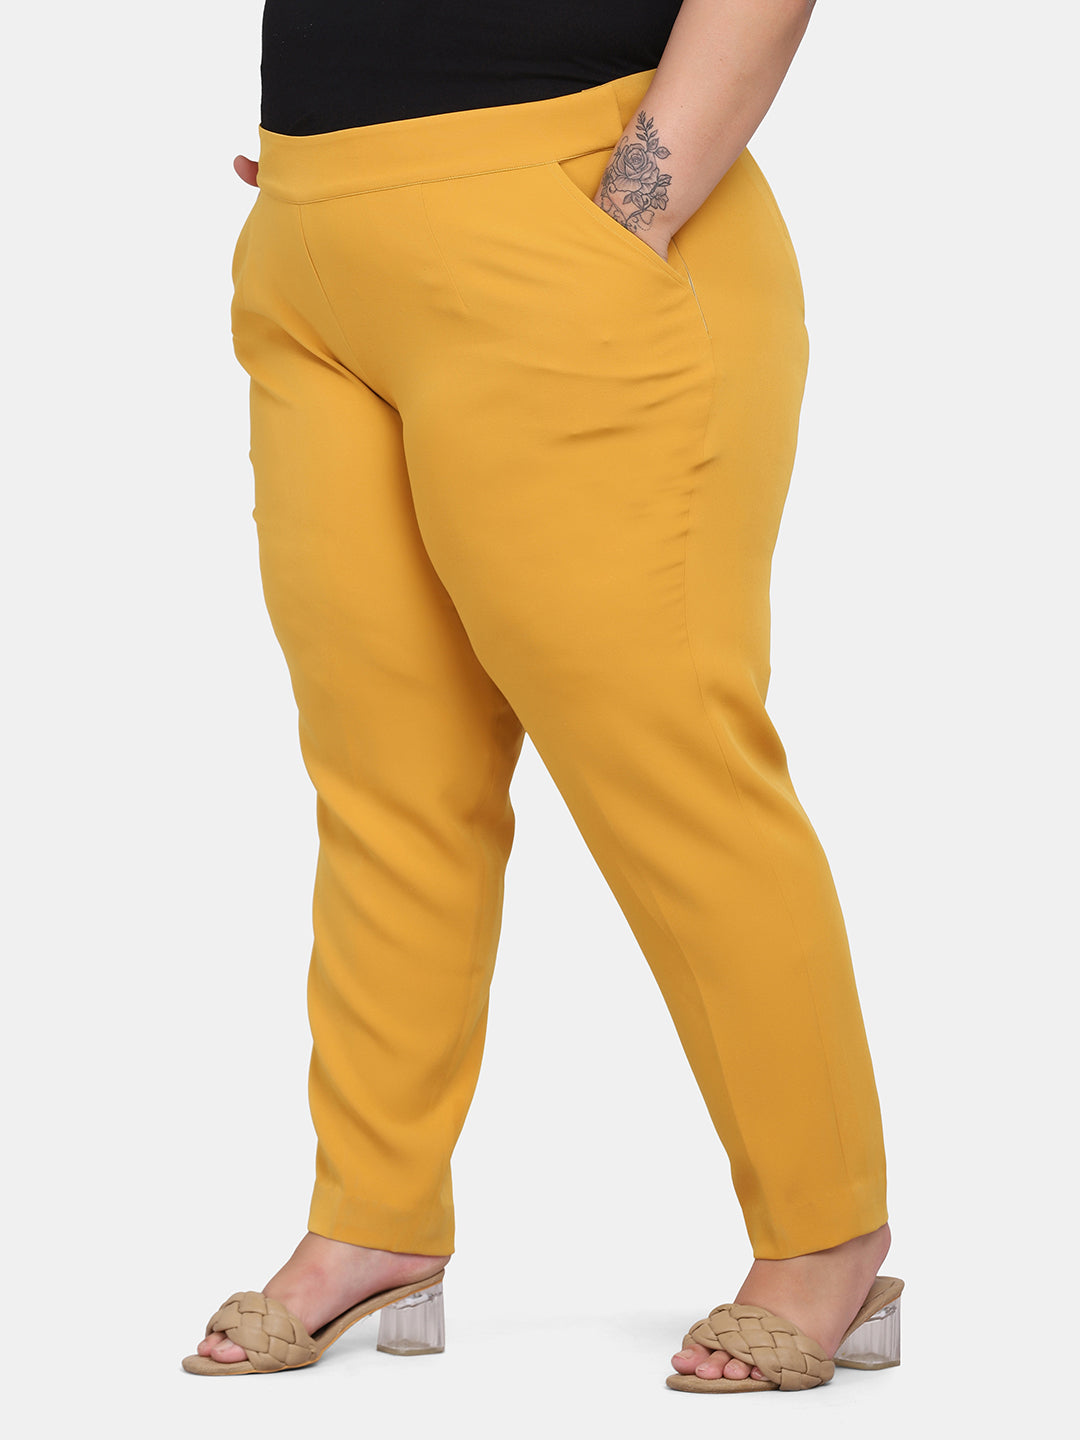 23 Spring Outfits With Yellow Pants For Women - Styleoholic